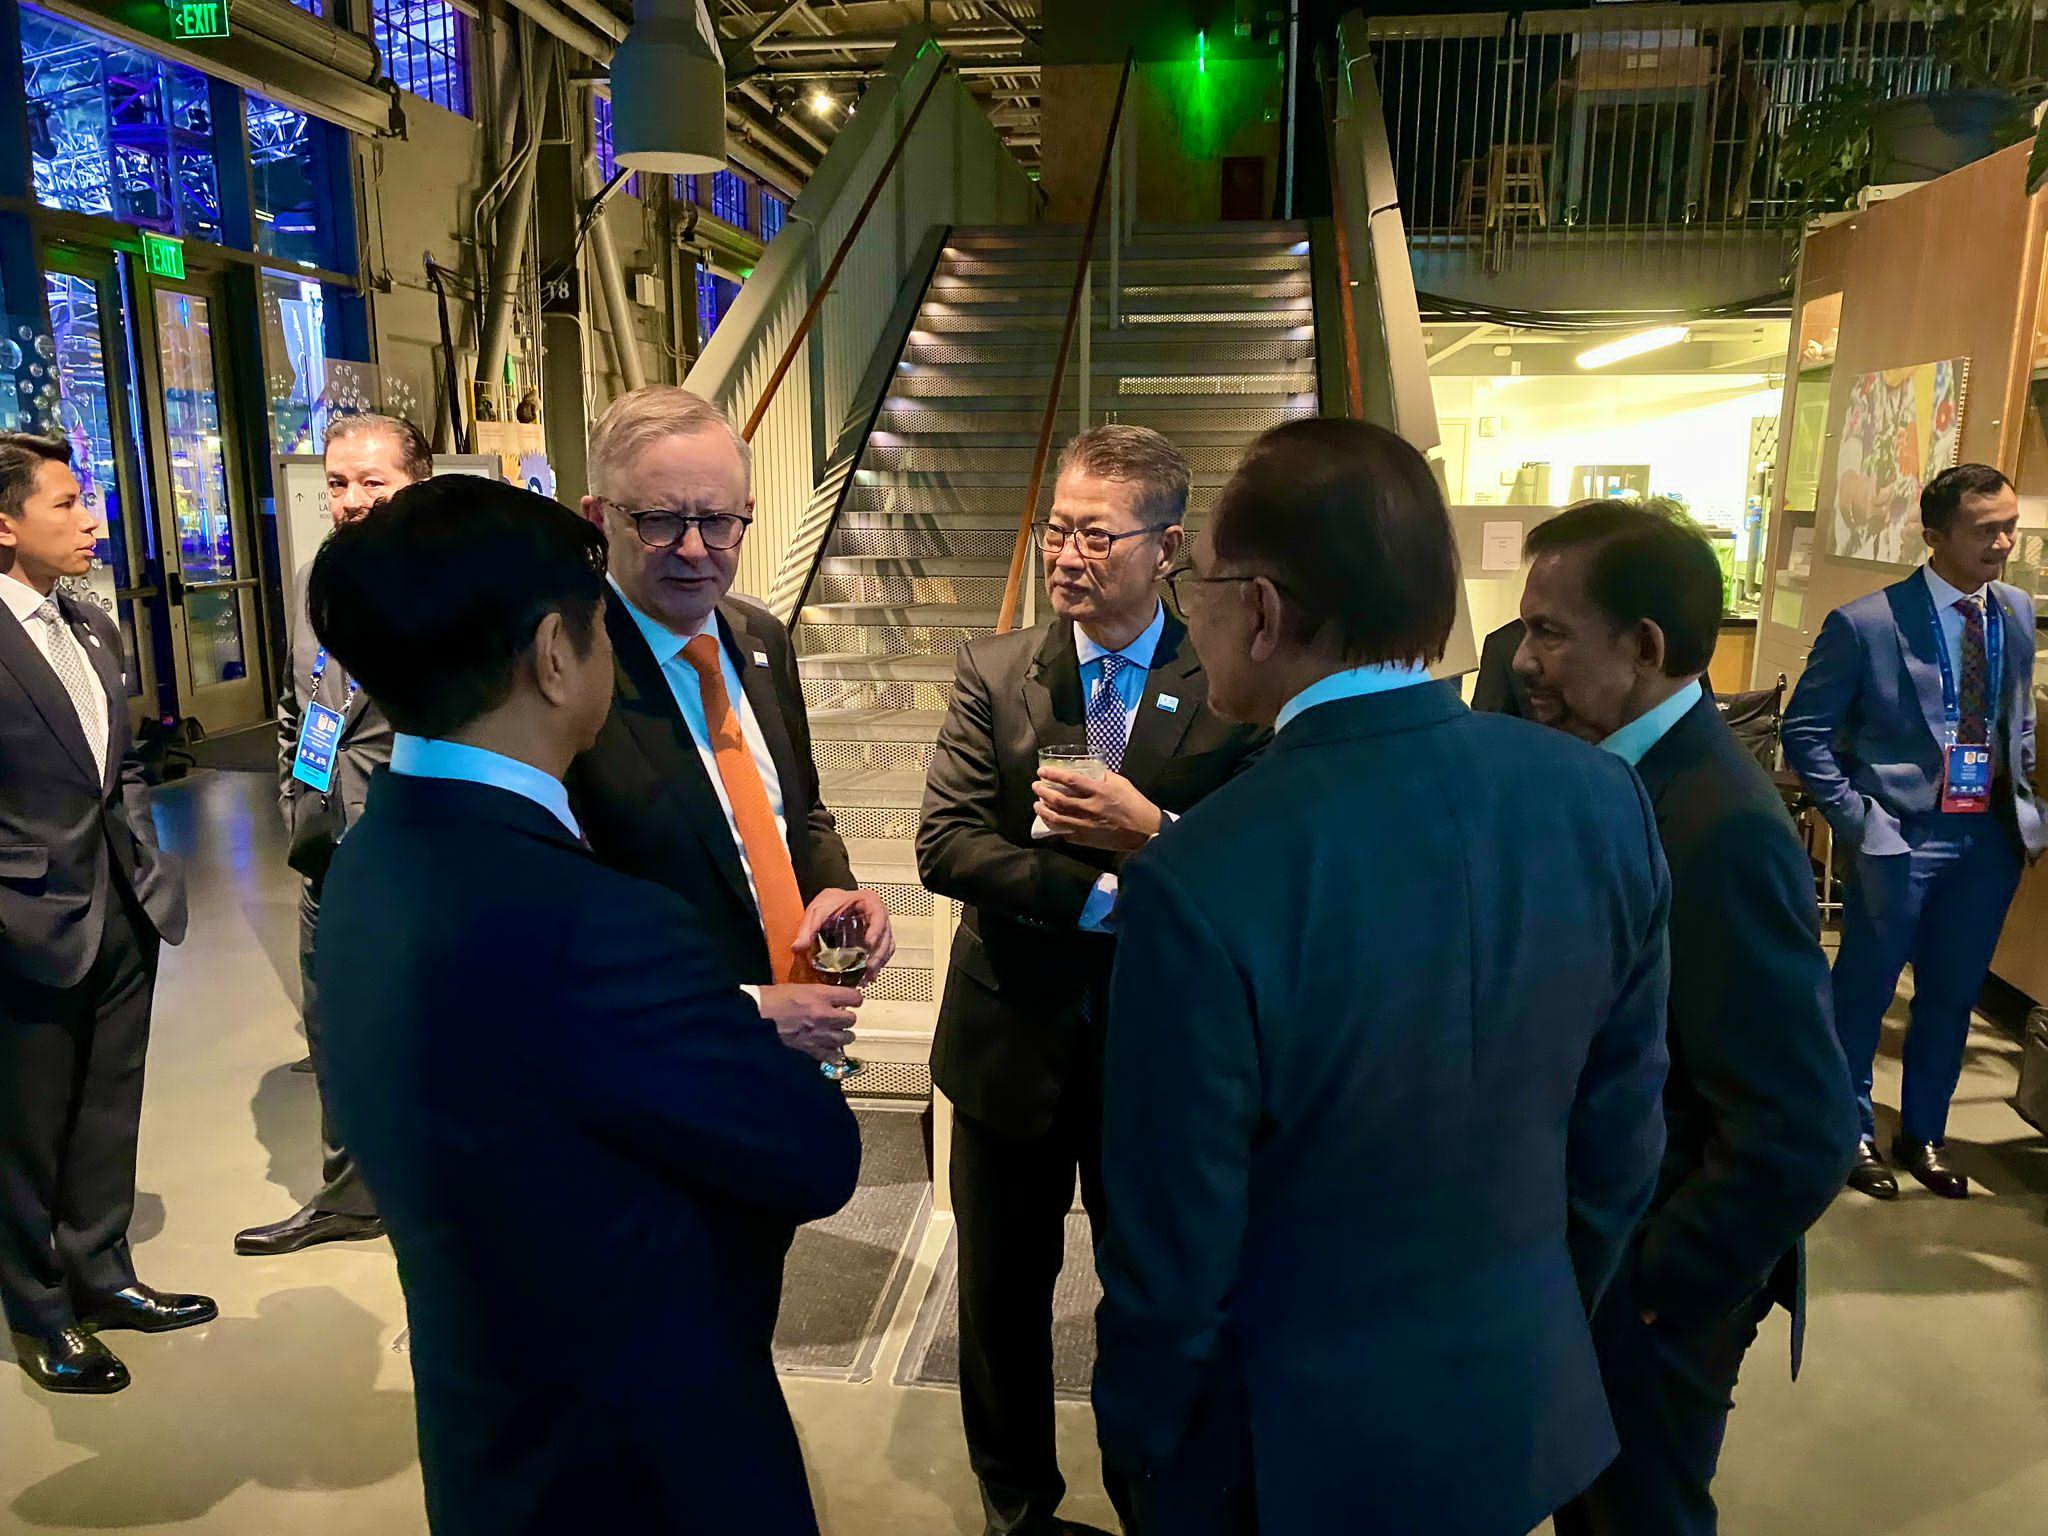 The Financial Secretary, Mr Paul Chan, attended the Asia-Pacific Economic Cooperation Economic Leaders' Meeting welcome reception and cultural performance in San Francisco, the United States, yesterday evening (November 15, San Francisco time). Photo shows Mr Chan (third left) having a dialogue with the Prime Minister of Australia, Mr Anthony Albanese (second left); the President of the Philippines, Mr Ferdinand Marcos Jr. (first left); the Prime Minister of Malaysia, Dato' Seri Anwar Ibrahim (second right); and Sultan of Brunei Darussalam, Sultan Haji Hassanal Bolkiah (first right), at the welcome reception.